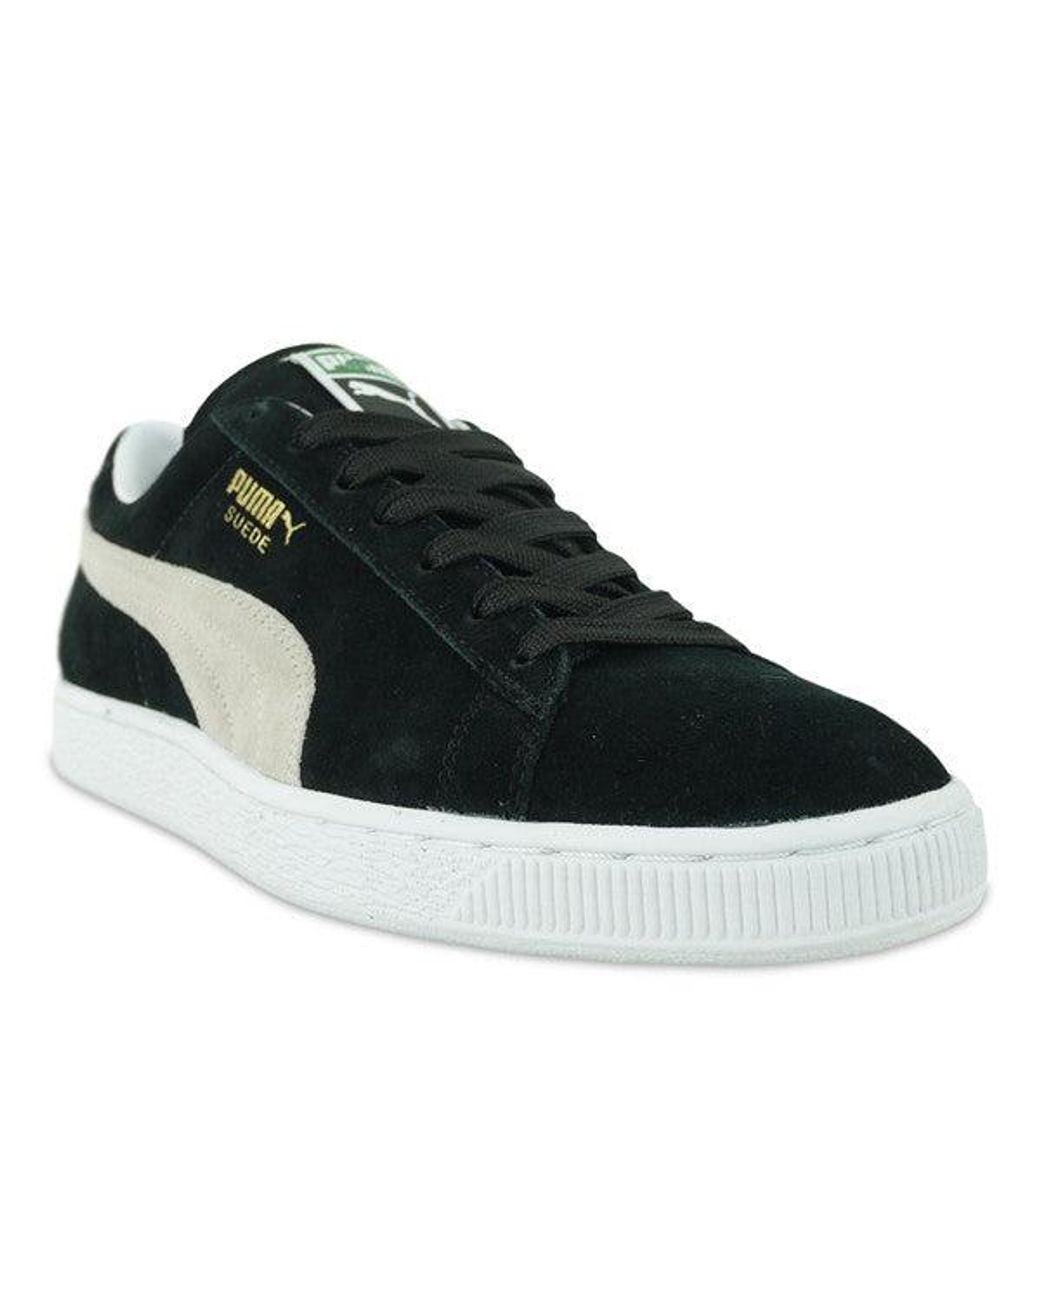 PUMA Suede Classic Trainers Black White for Men - Save 29% | Lyst